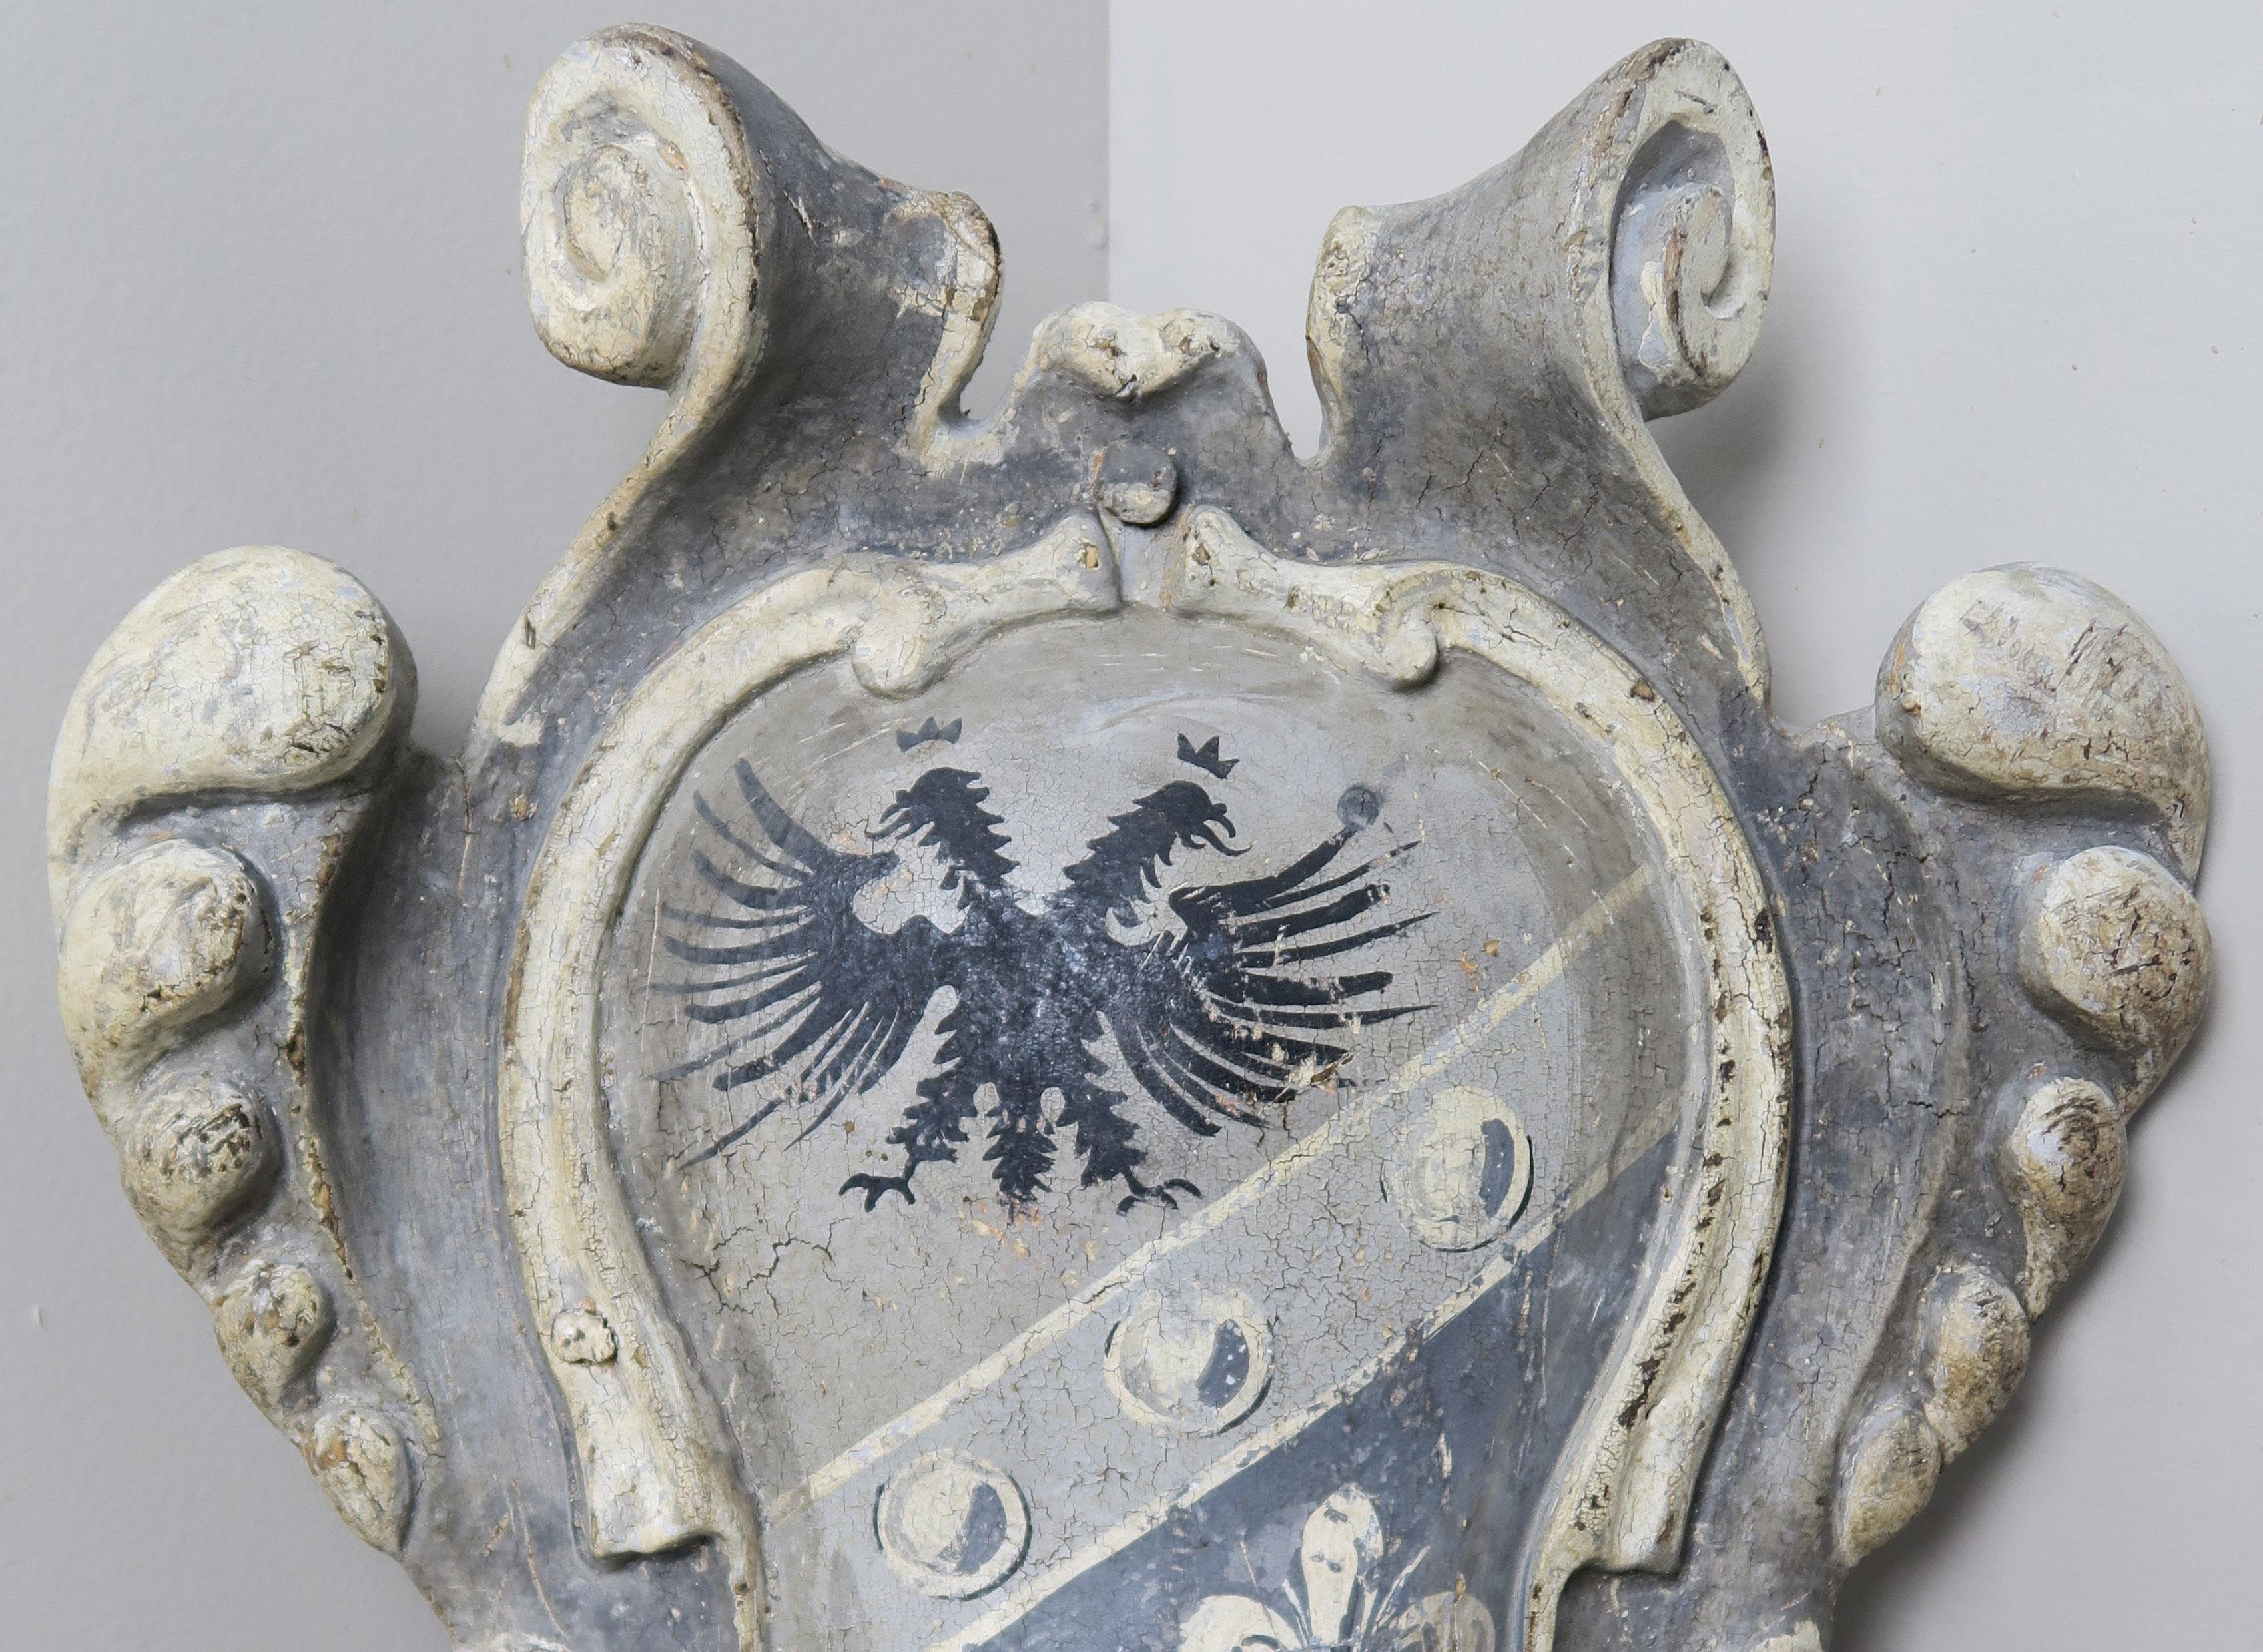 Italian wood scrolled shield depicting a two headed winged dragon and fleur de lys. The shield is hand painted in soft shades of gray and antique white.